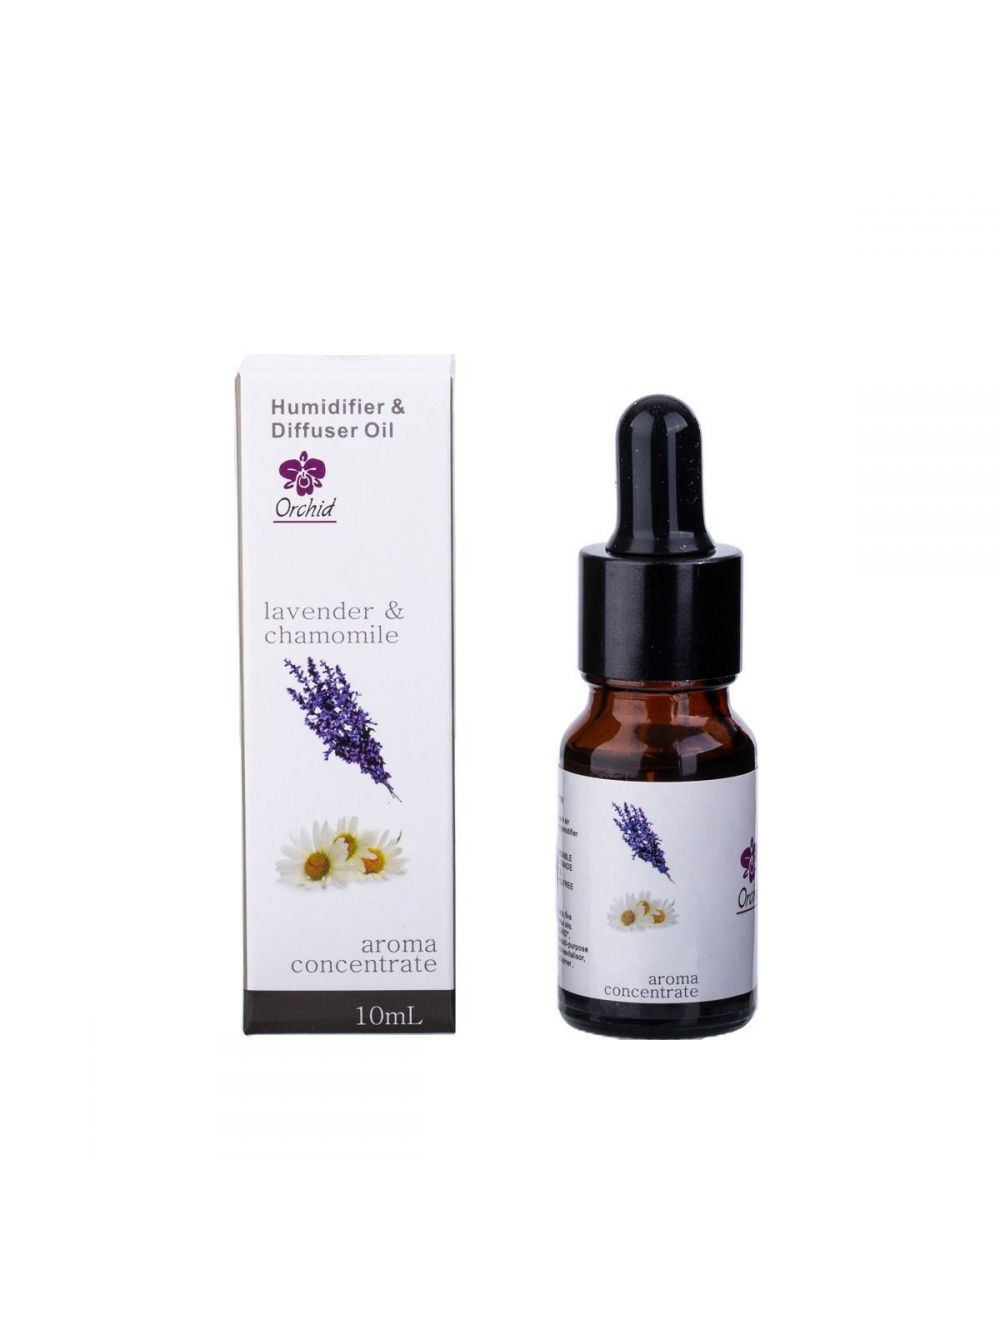 Orchid Humidifier Oil Lavender & Chamomile 10Ml